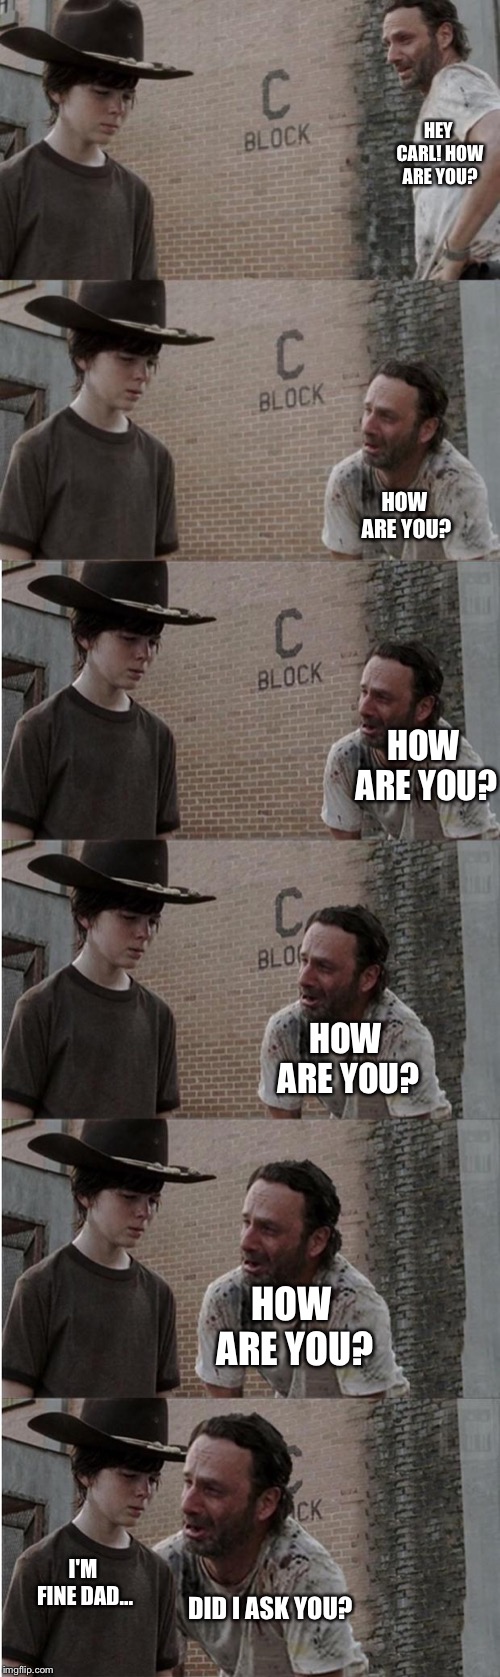 How are you | HEY CARL! HOW ARE YOU? HOW ARE YOU? HOW ARE YOU? HOW ARE YOU? HOW ARE YOU? I'M FINE DAD... DID I ASK YOU? | image tagged in memes,rick and carl longer,how are you,im fine,meme | made w/ Imgflip meme maker